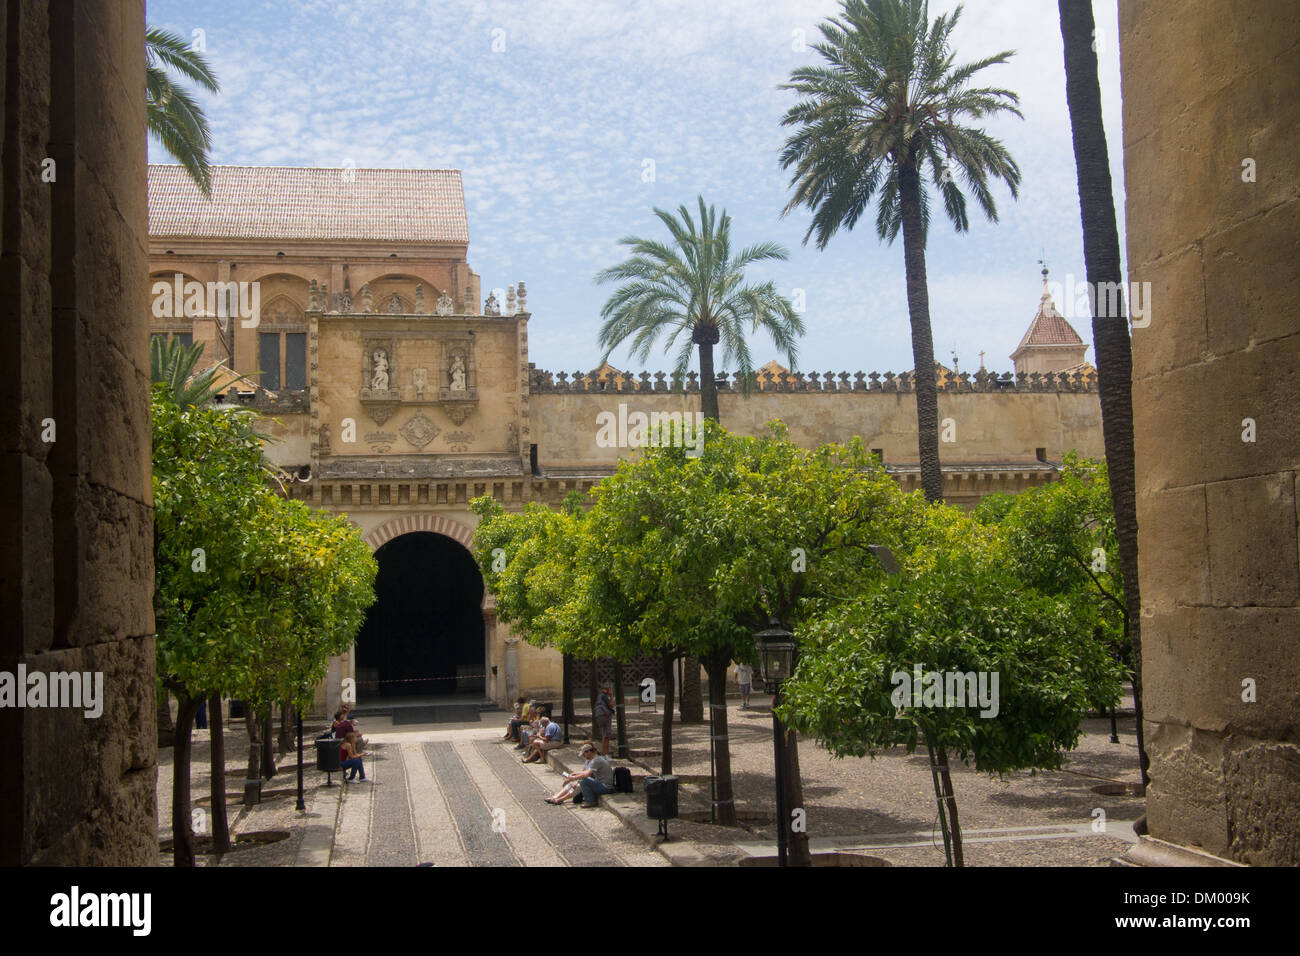 Entrance to the Mezquita (Mosque-Cathedral), Cordoba, Andalucia, Spain. AKA 'Great Mosque of Cordoba'. Stock Photo